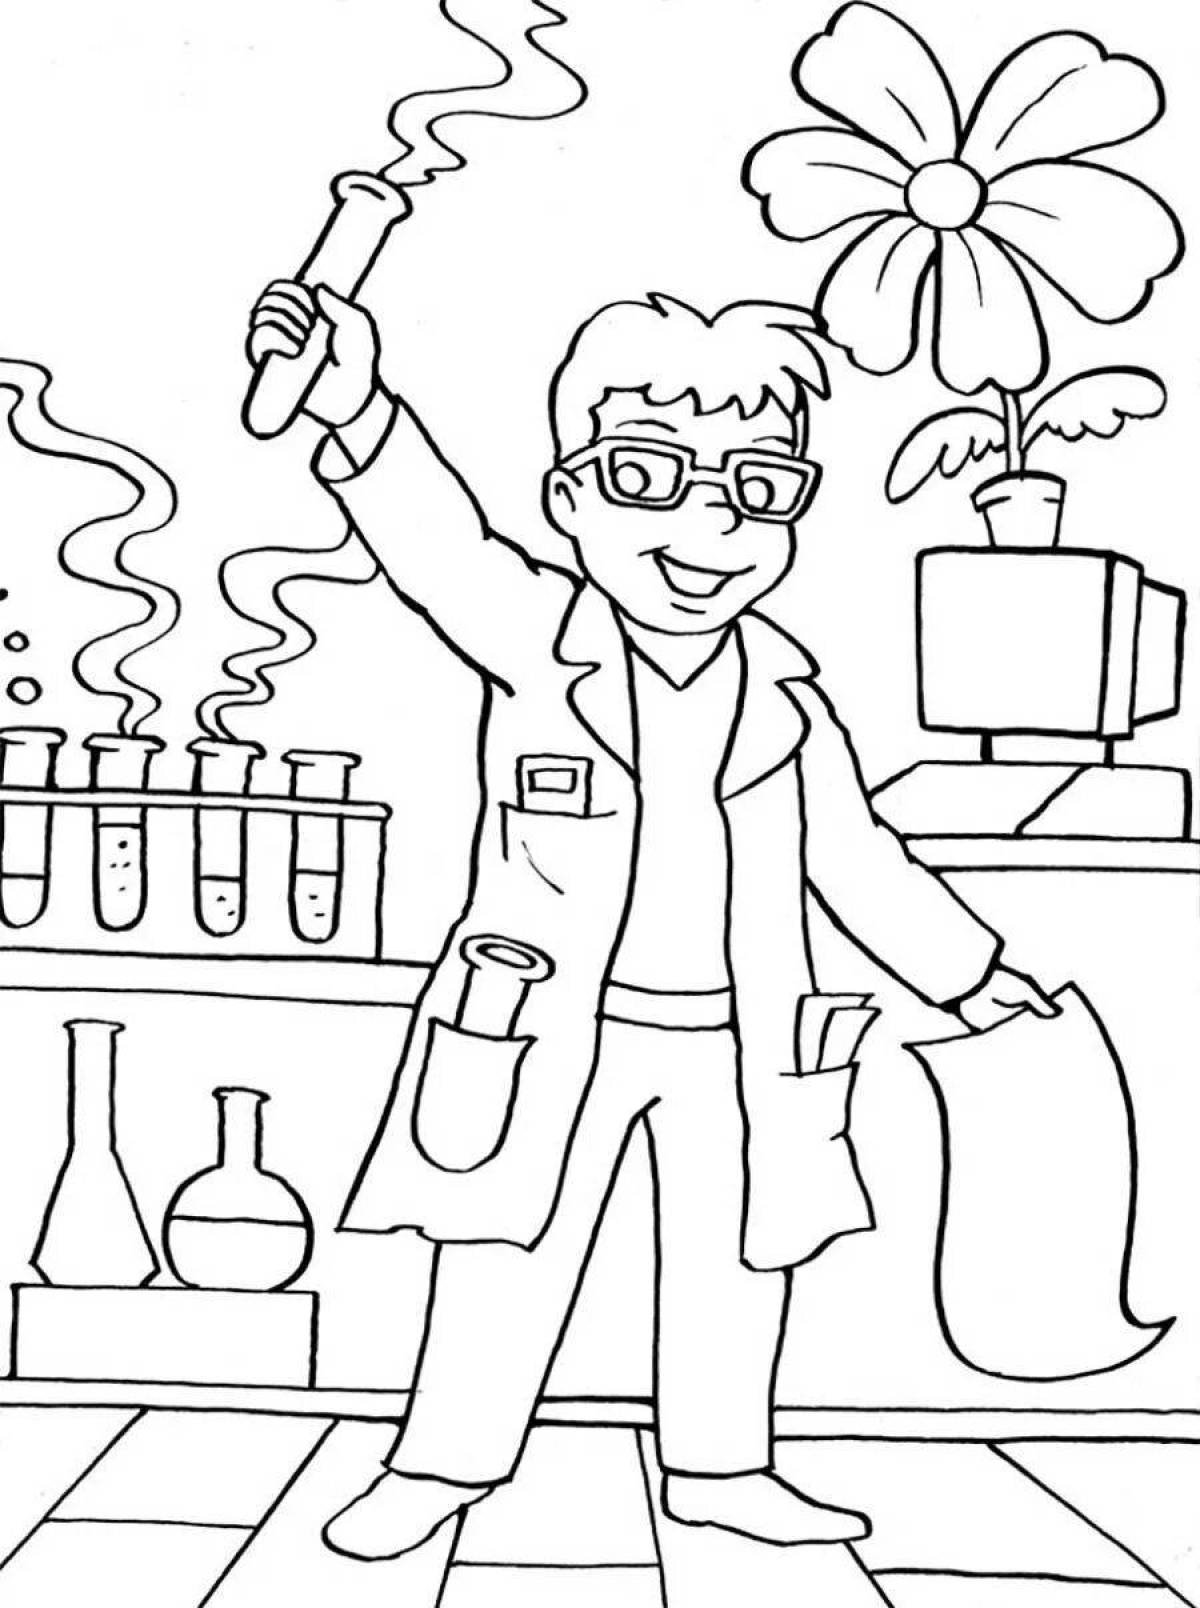 Intriguing science coloring book for kids